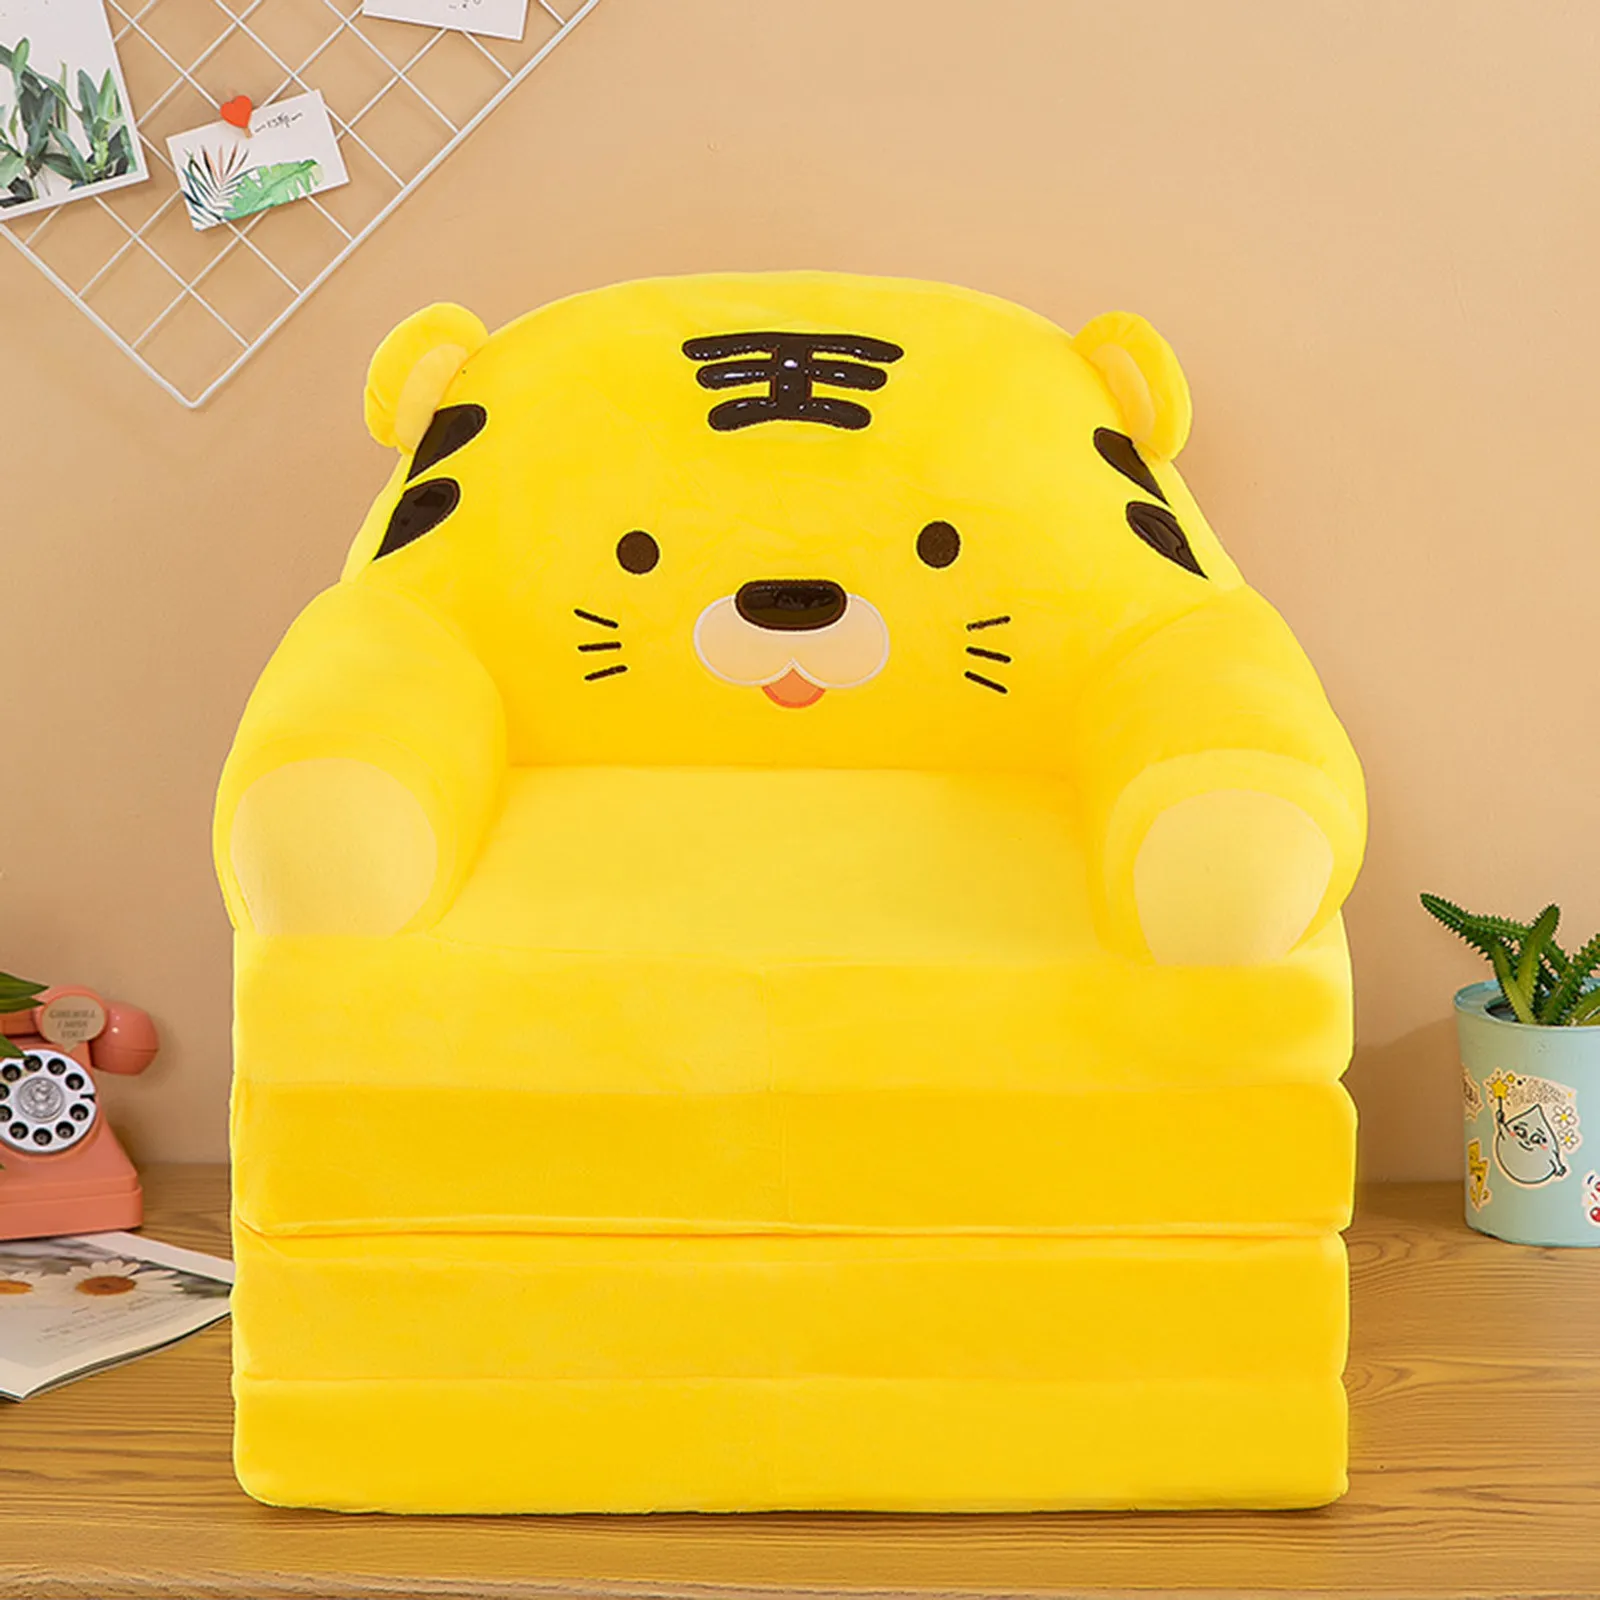 Cushions to Pressure Cushions for Back Support Plush Foldable Kids Sofa  Backrest Armchair 2 In 1 Foldable Children Sofa Cute Cartoon Lazy Sofa